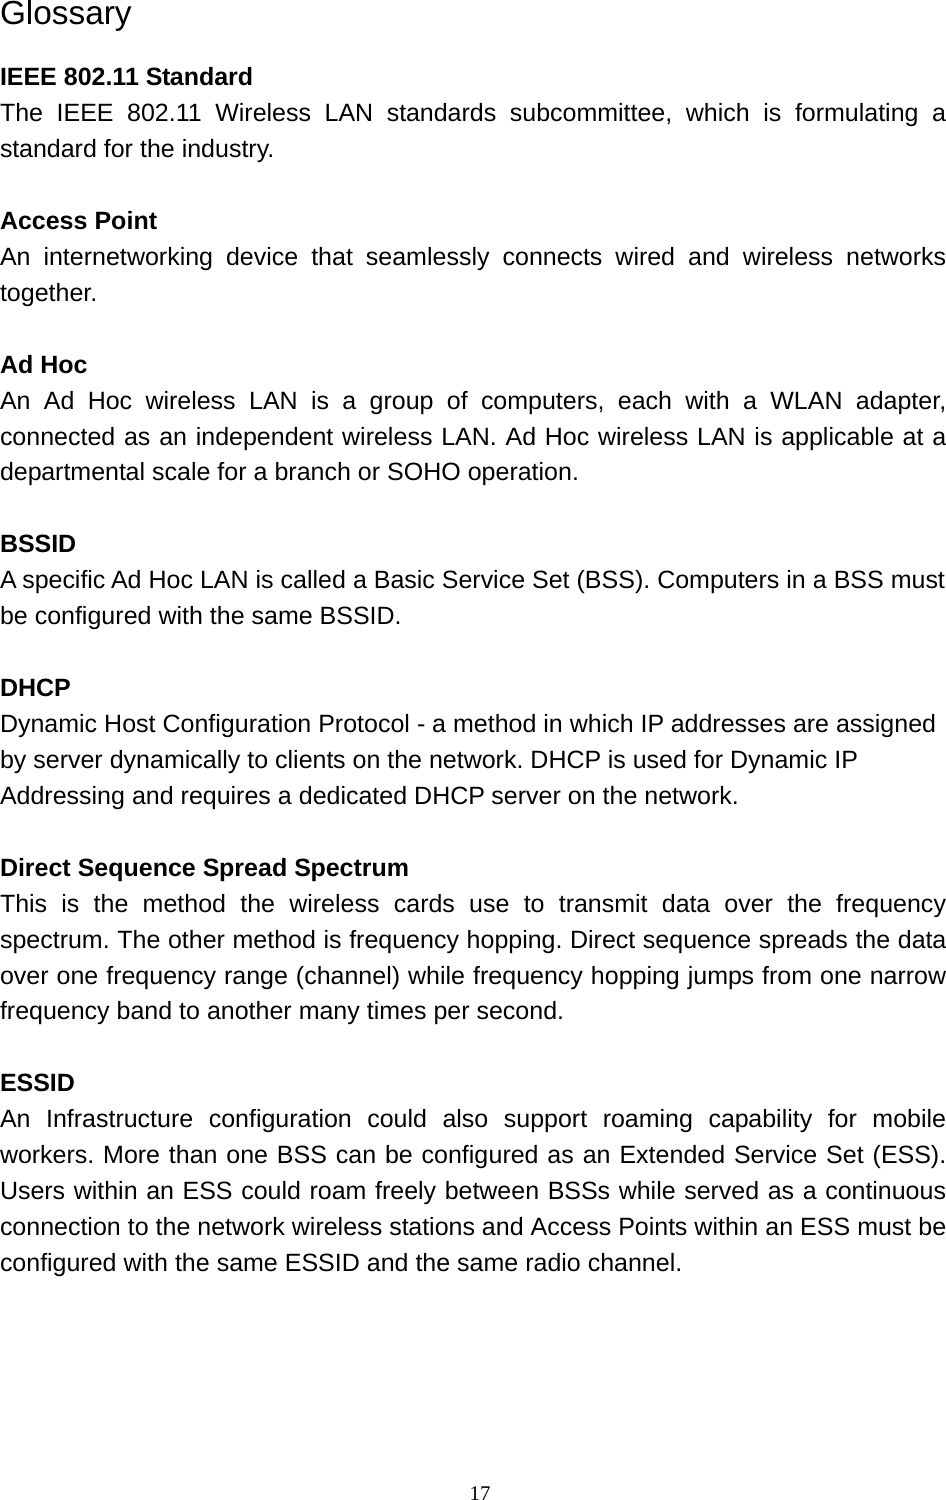 Glossary IEEE 802.11 Standard The IEEE 802.11 Wireless LAN standards subcommittee, which is formulating a standard for the industry.  Access Point An internetworking device that seamlessly connects wired and wireless networks together.  Ad Hoc   An Ad Hoc wireless LAN is a group of computers, each with a WLAN adapter, connected as an independent wireless LAN. Ad Hoc wireless LAN is applicable at a departmental scale for a branch or SOHO operation.  BSSID A specific Ad Hoc LAN is called a Basic Service Set (BSS). Computers in a BSS must be configured with the same BSSID.  DHCP Dynamic Host Configuration Protocol - a method in which IP addresses are assigned by server dynamically to clients on the network. DHCP is used for Dynamic IP Addressing and requires a dedicated DHCP server on the network.  Direct Sequence Spread Spectrum This is the method the wireless cards use to transmit data over the frequency spectrum. The other method is frequency hopping. Direct sequence spreads the data over one frequency range (channel) while frequency hopping jumps from one narrow frequency band to another many times per second.  ESSID An Infrastructure configuration could also support roaming capability for mobile workers. More than one BSS can be configured as an Extended Service Set (ESS). Users within an ESS could roam freely between BSSs while served as a continuous connection to the network wireless stations and Access Points within an ESS must be configured with the same ESSID and the same radio channel.      17 